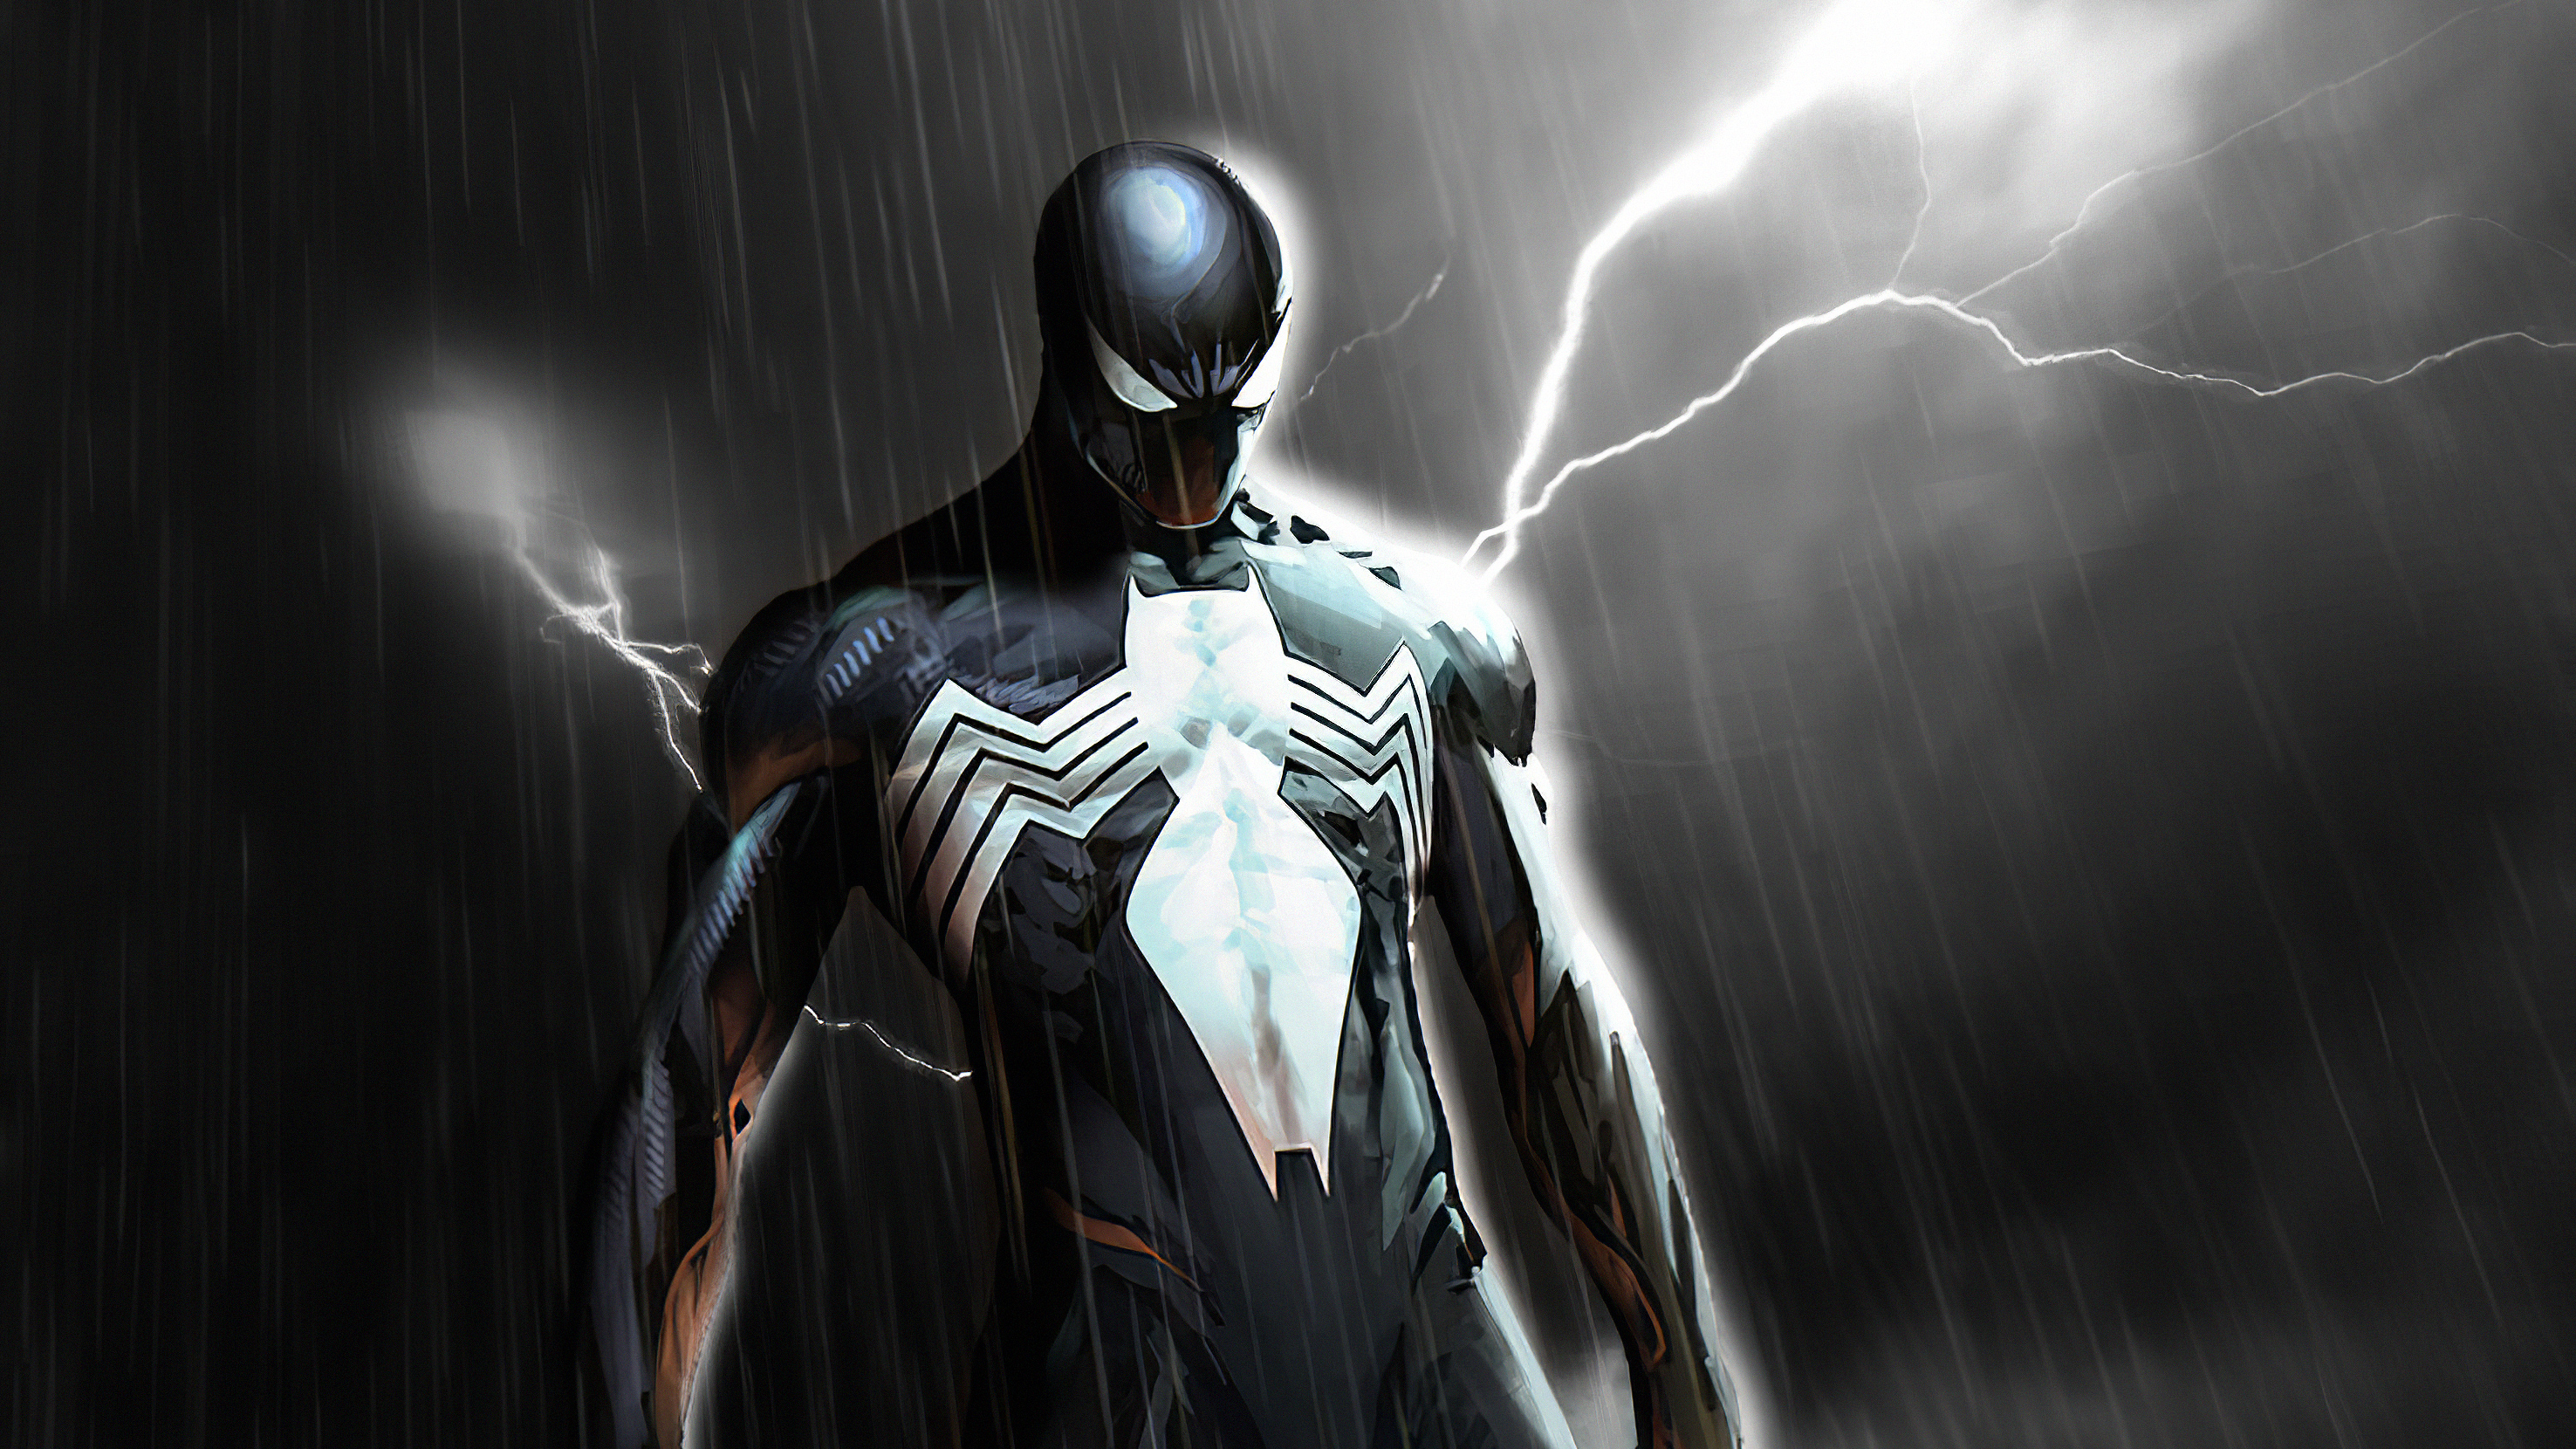 76 Hd Wallpaper Of Spiderman Venom Images amp Pictures MyWeb